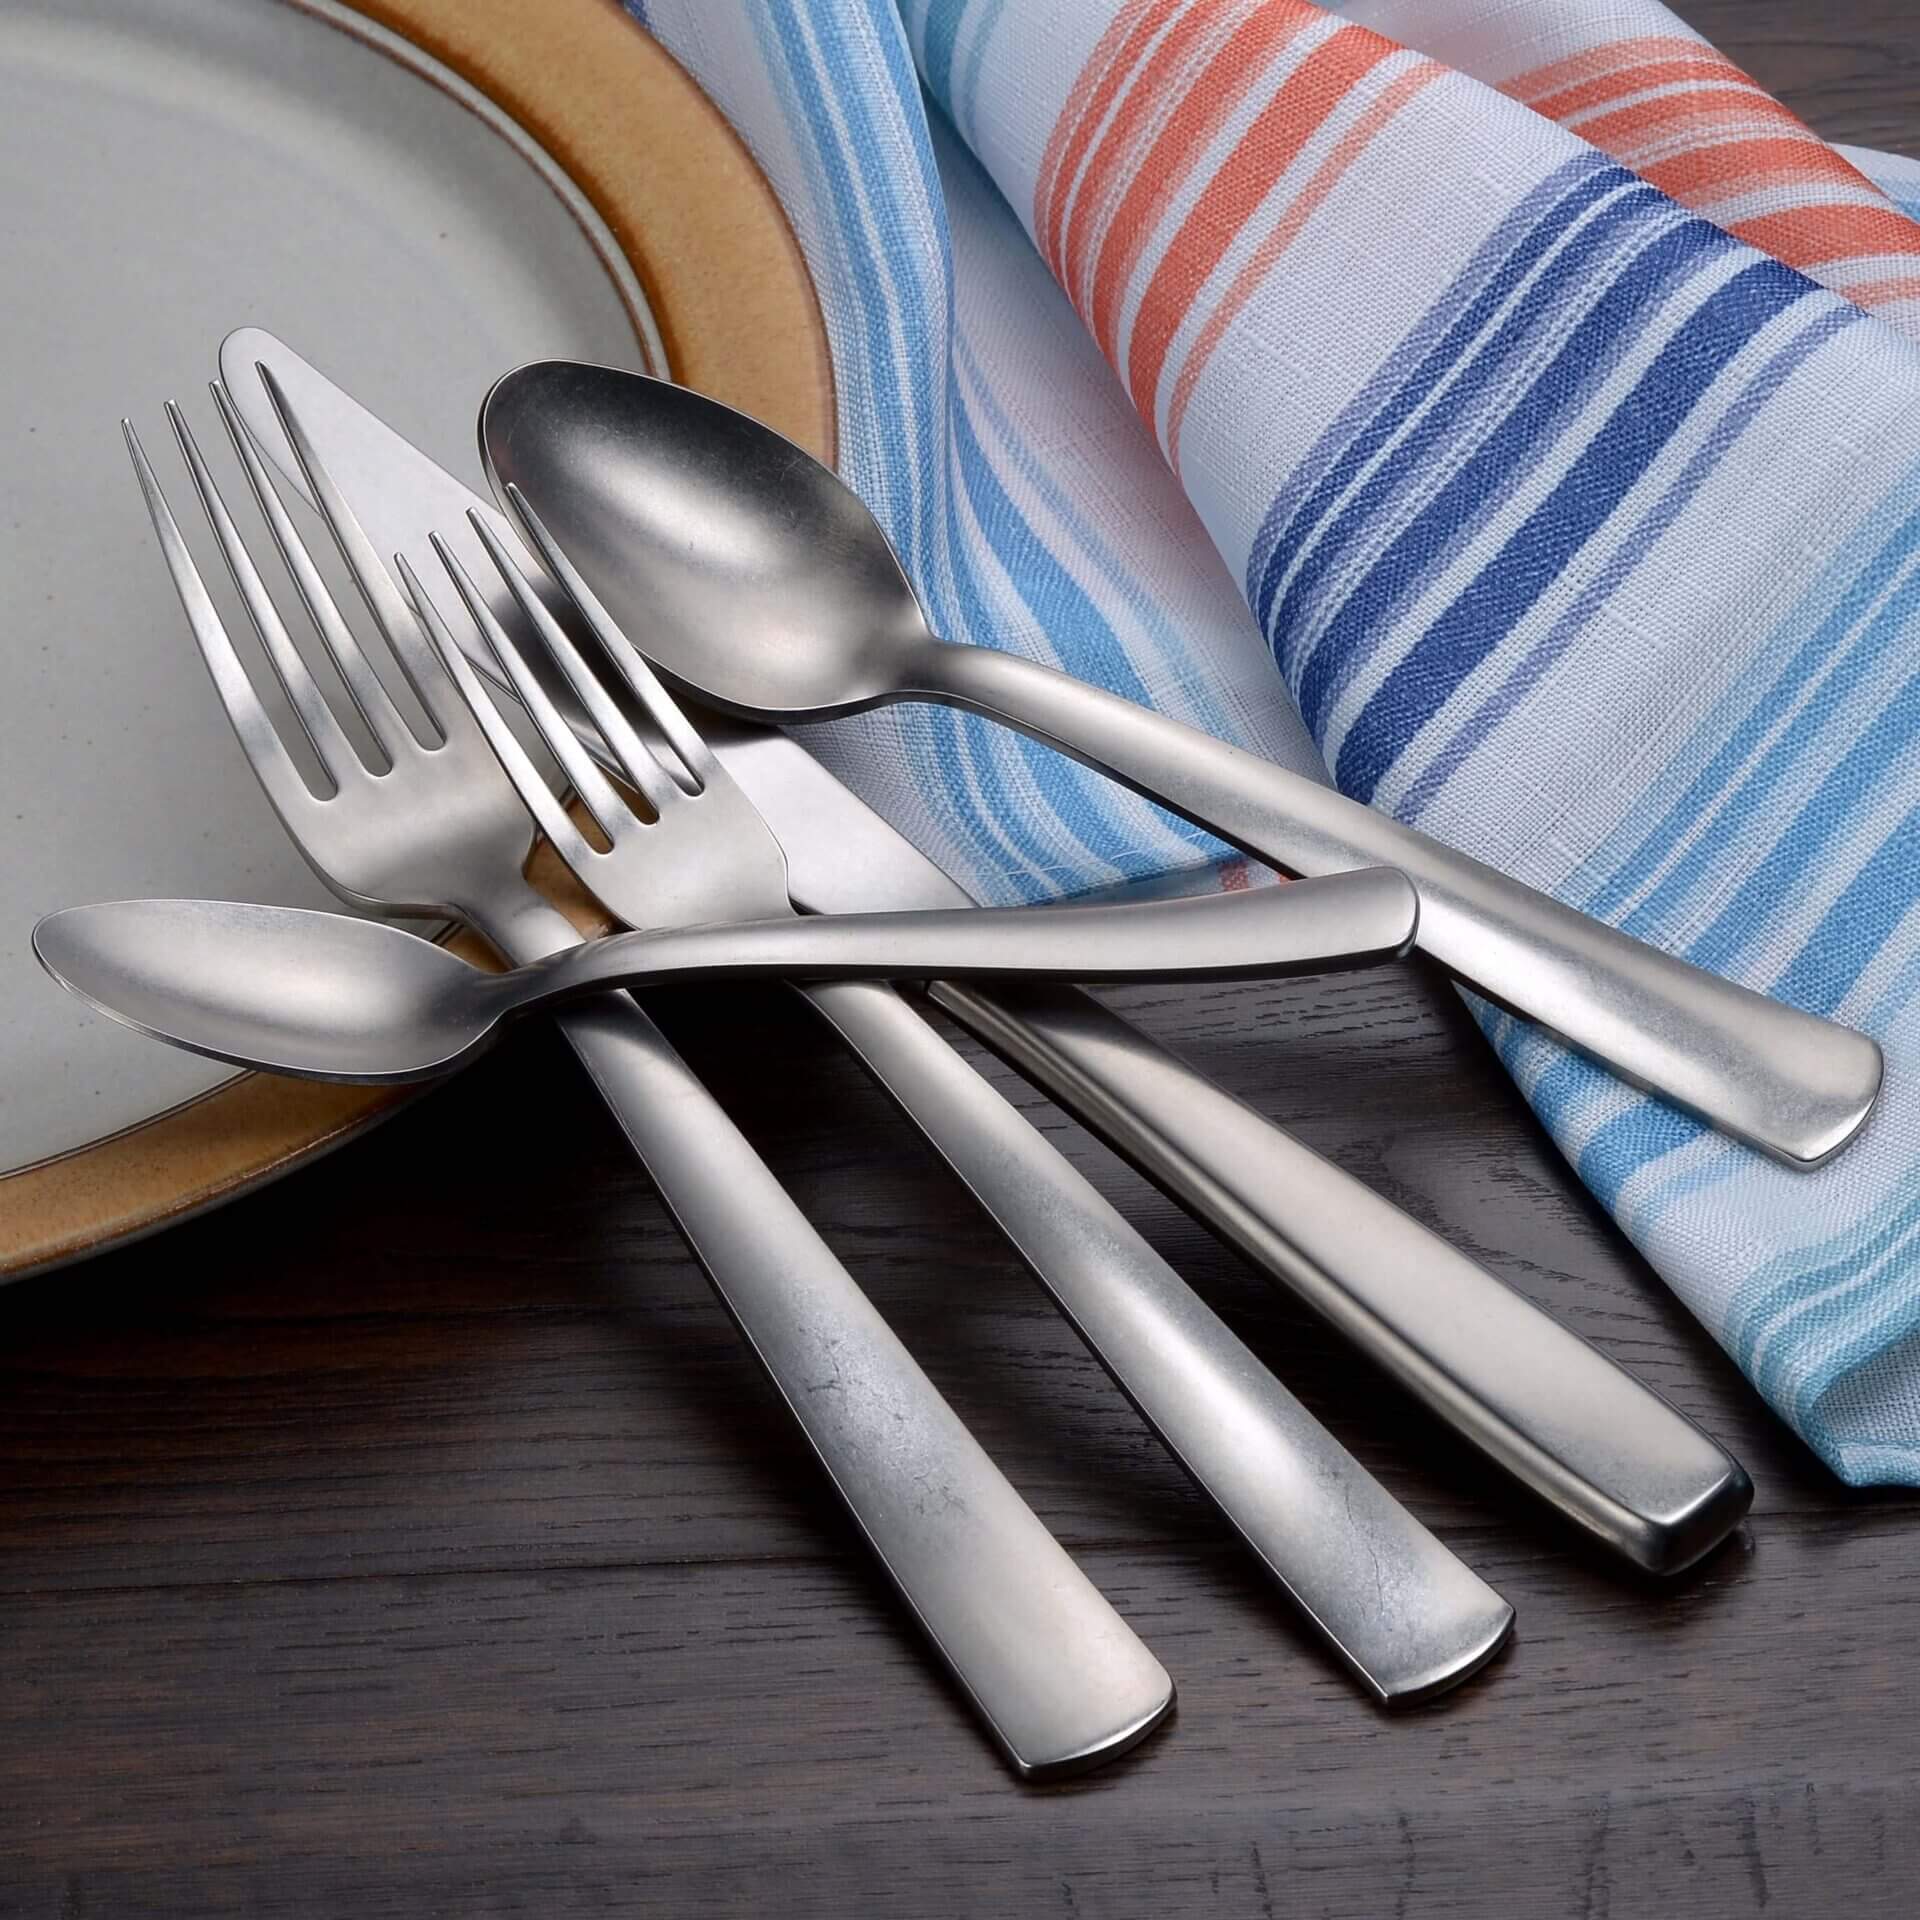 Stainless Steel Spoons, Fork and Butter Knife Bunch on a Table